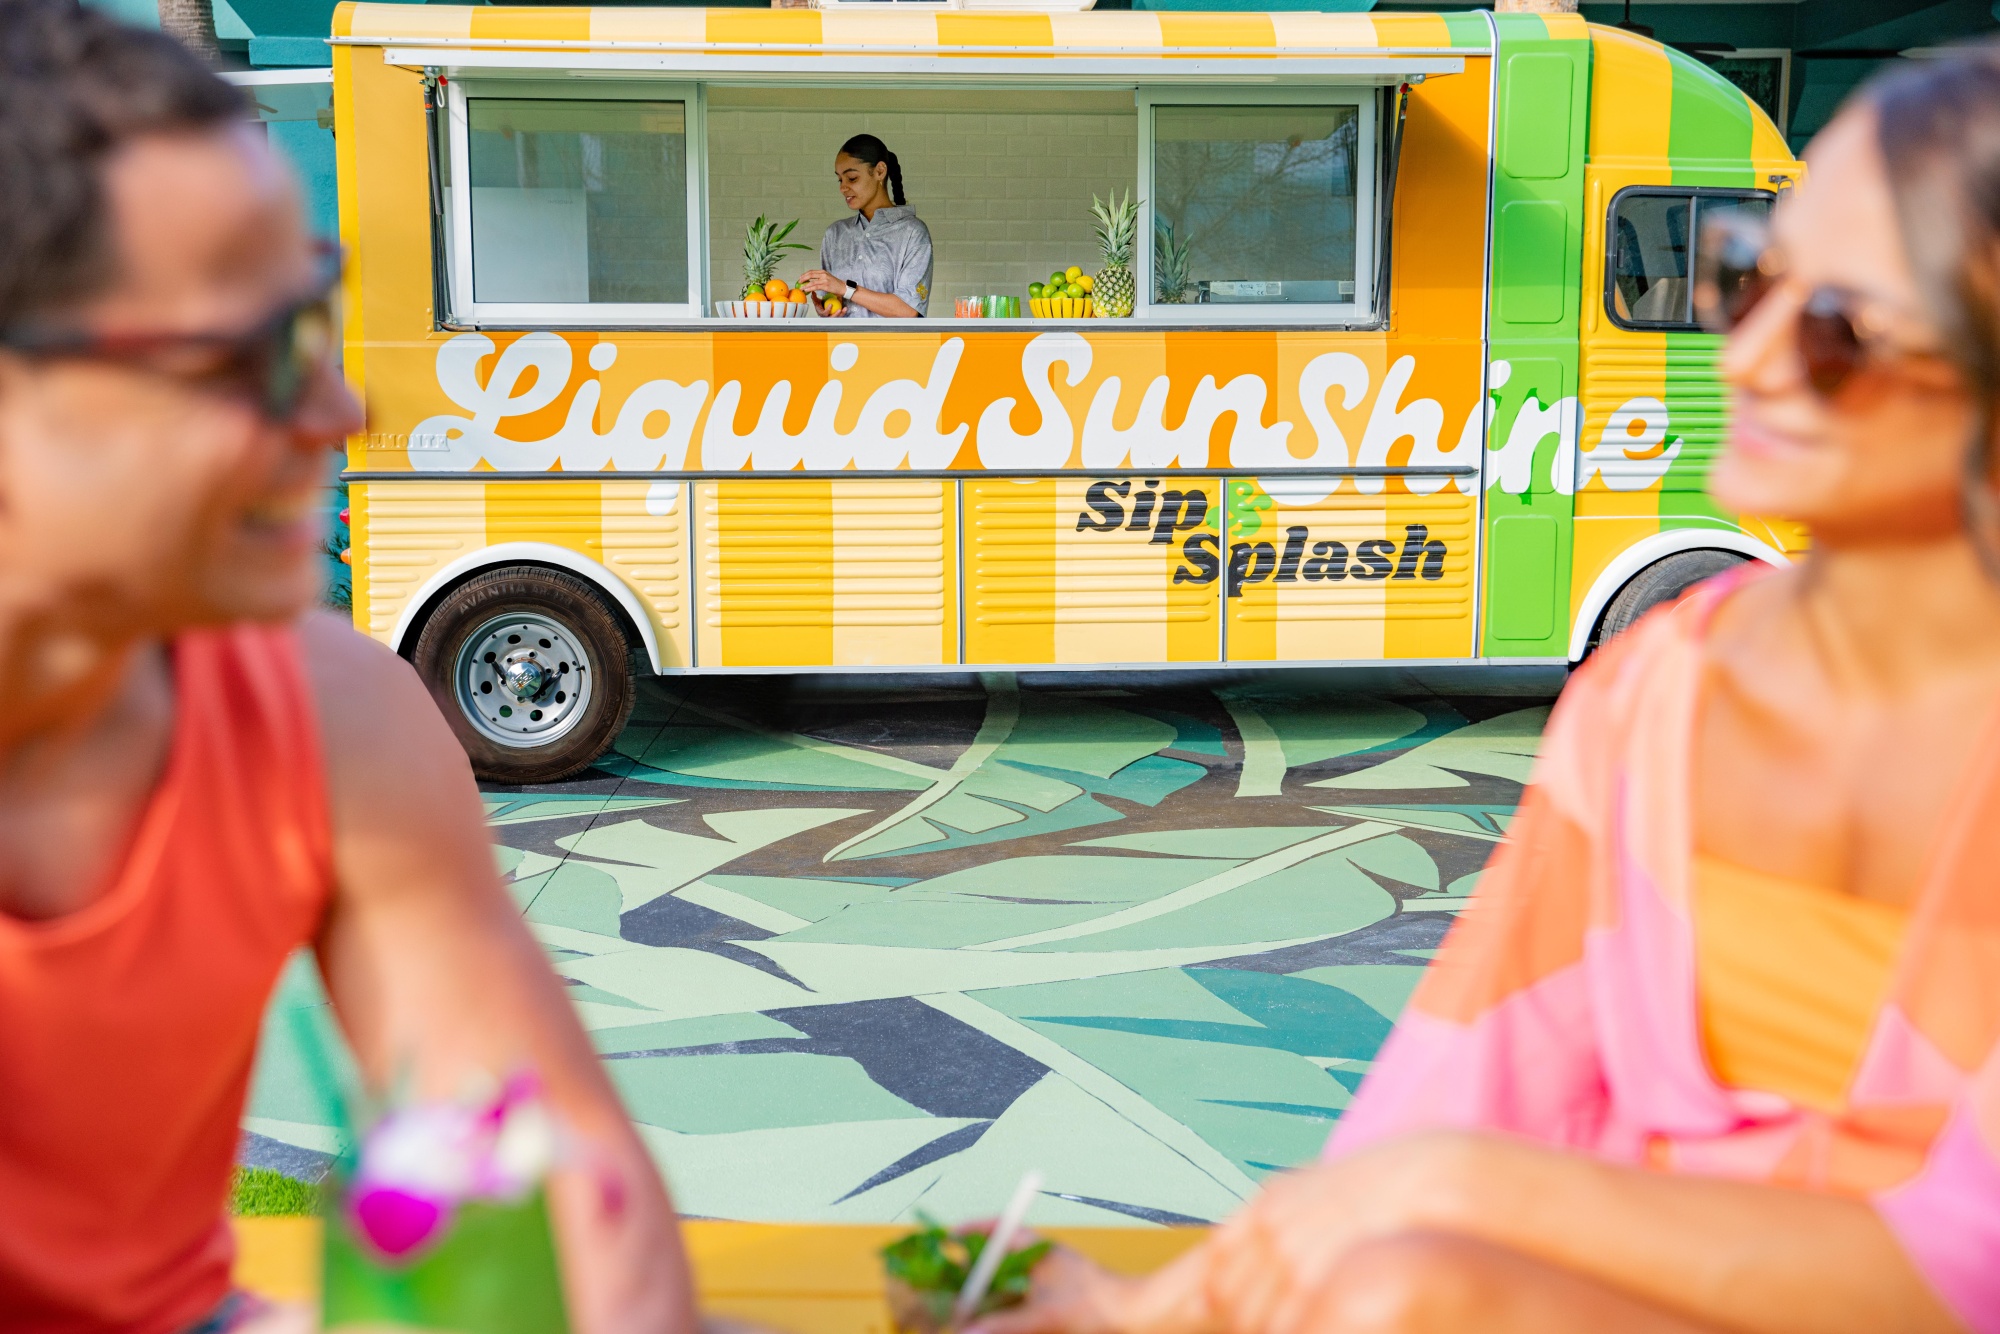 A bright and colorful mobile food truck with 'Liquid Sunshine' painted on the side. In the foreground a couple is enjoying cocktails.